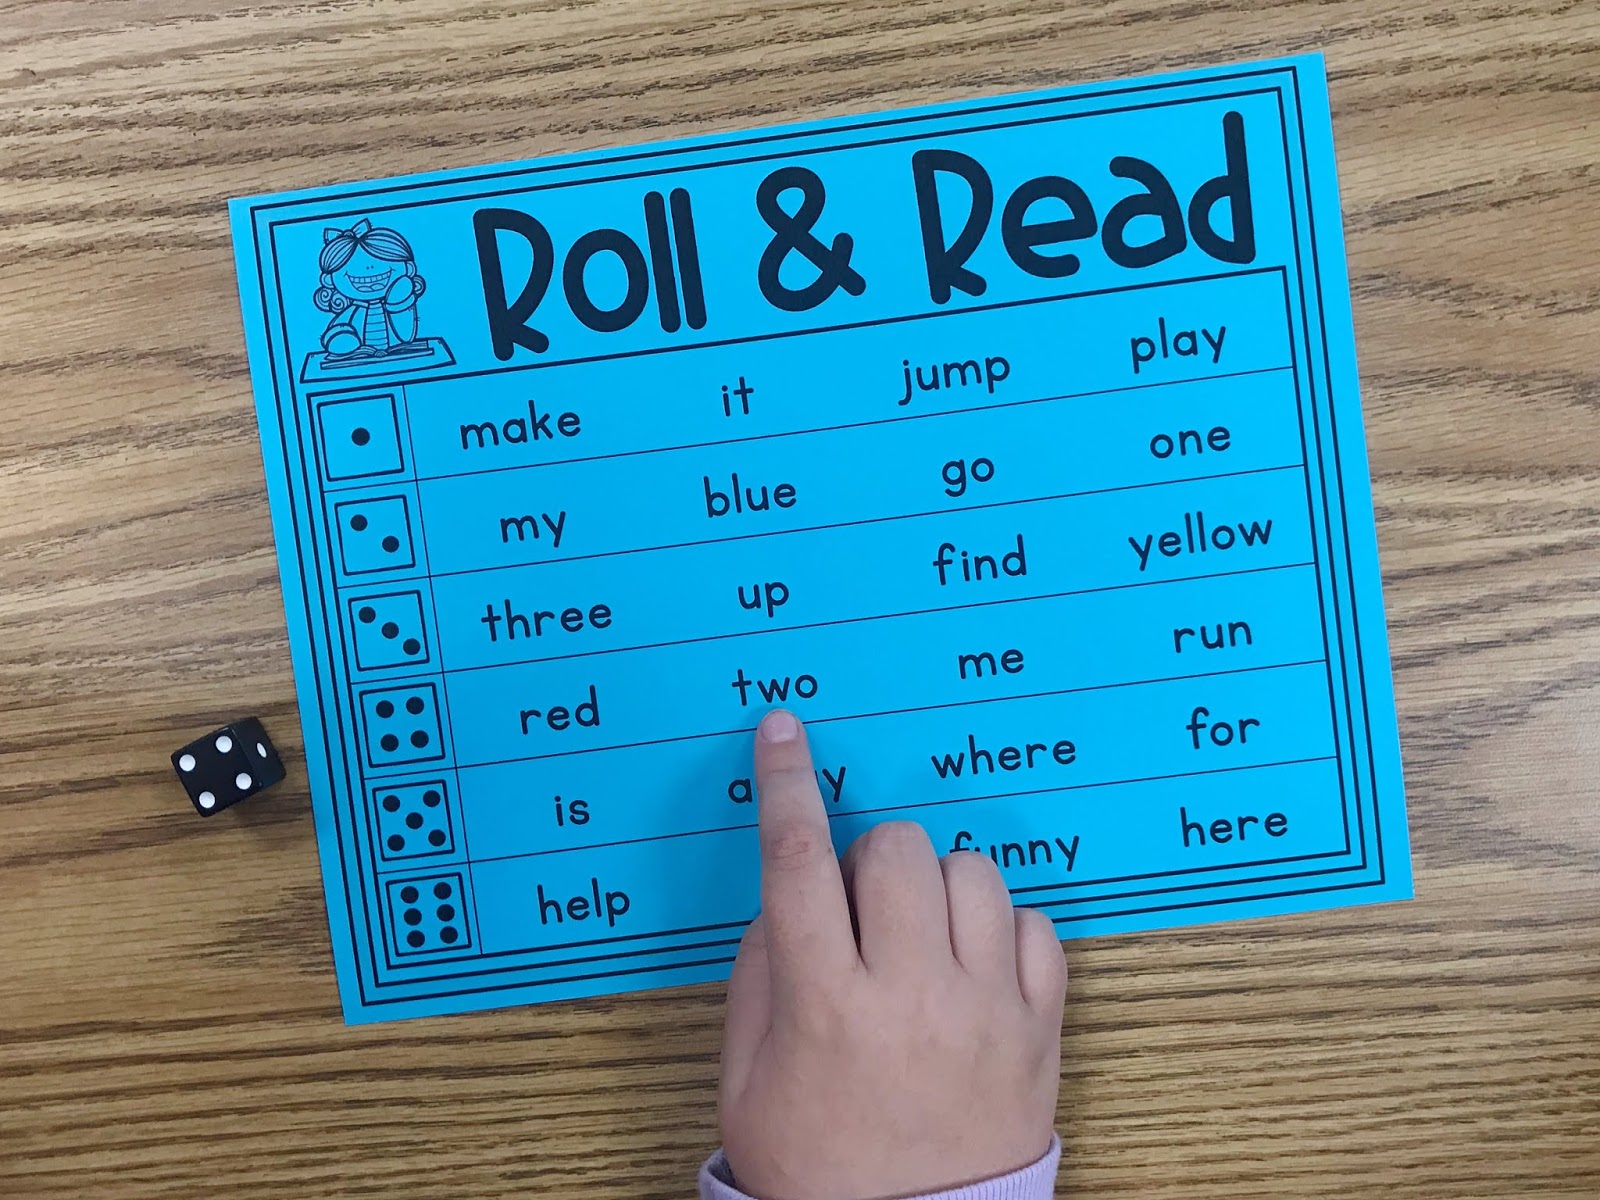 Teaching primary grades or special education means sight words should be part of your daily review. Students required repeated exposure to allow mastery of recognition. Whether you utilize these 6 fun ways as a whole class, centers, or small groups, they are sure to create a more exciting way of practice for your kids. This blog post shows a few quick, simple games and ideas to to help reinforce your students recognition of sight words. {lower elementary, special education, centers}